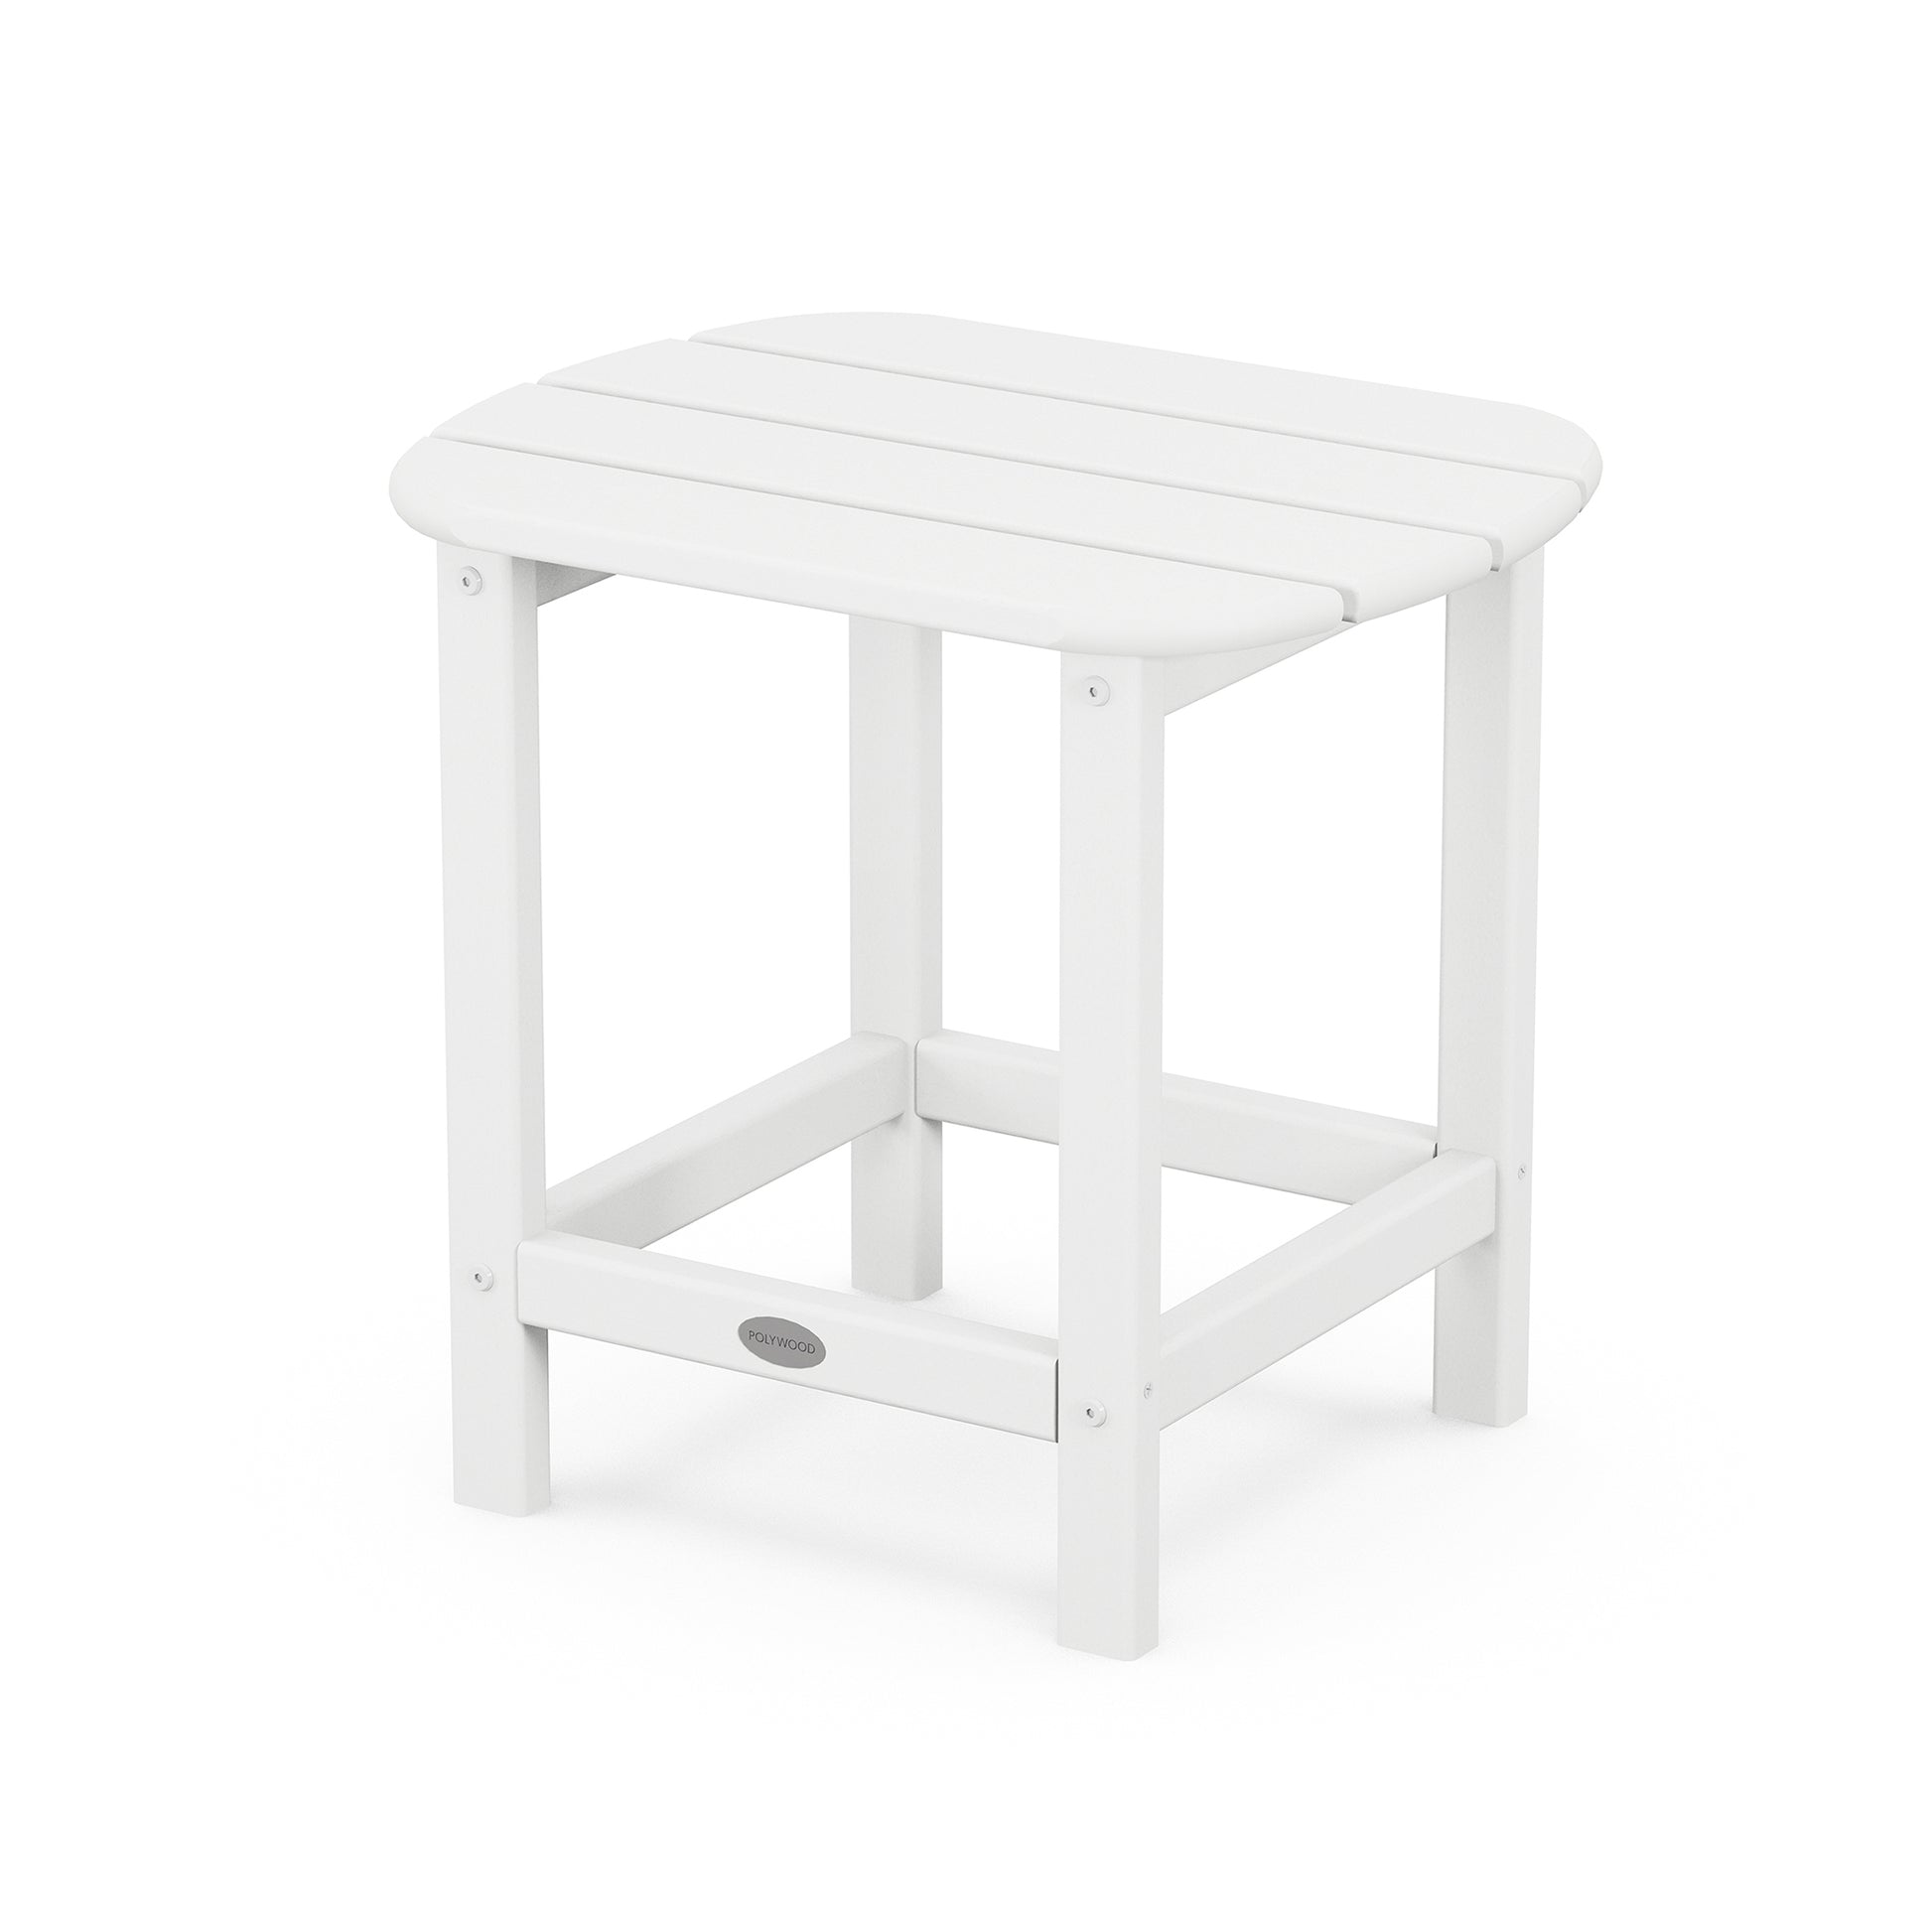 A simple white POLYWOOD® South Beach Adirondack 18" Side Table with a rectangular top and a lower shelf, set against a plain white background.